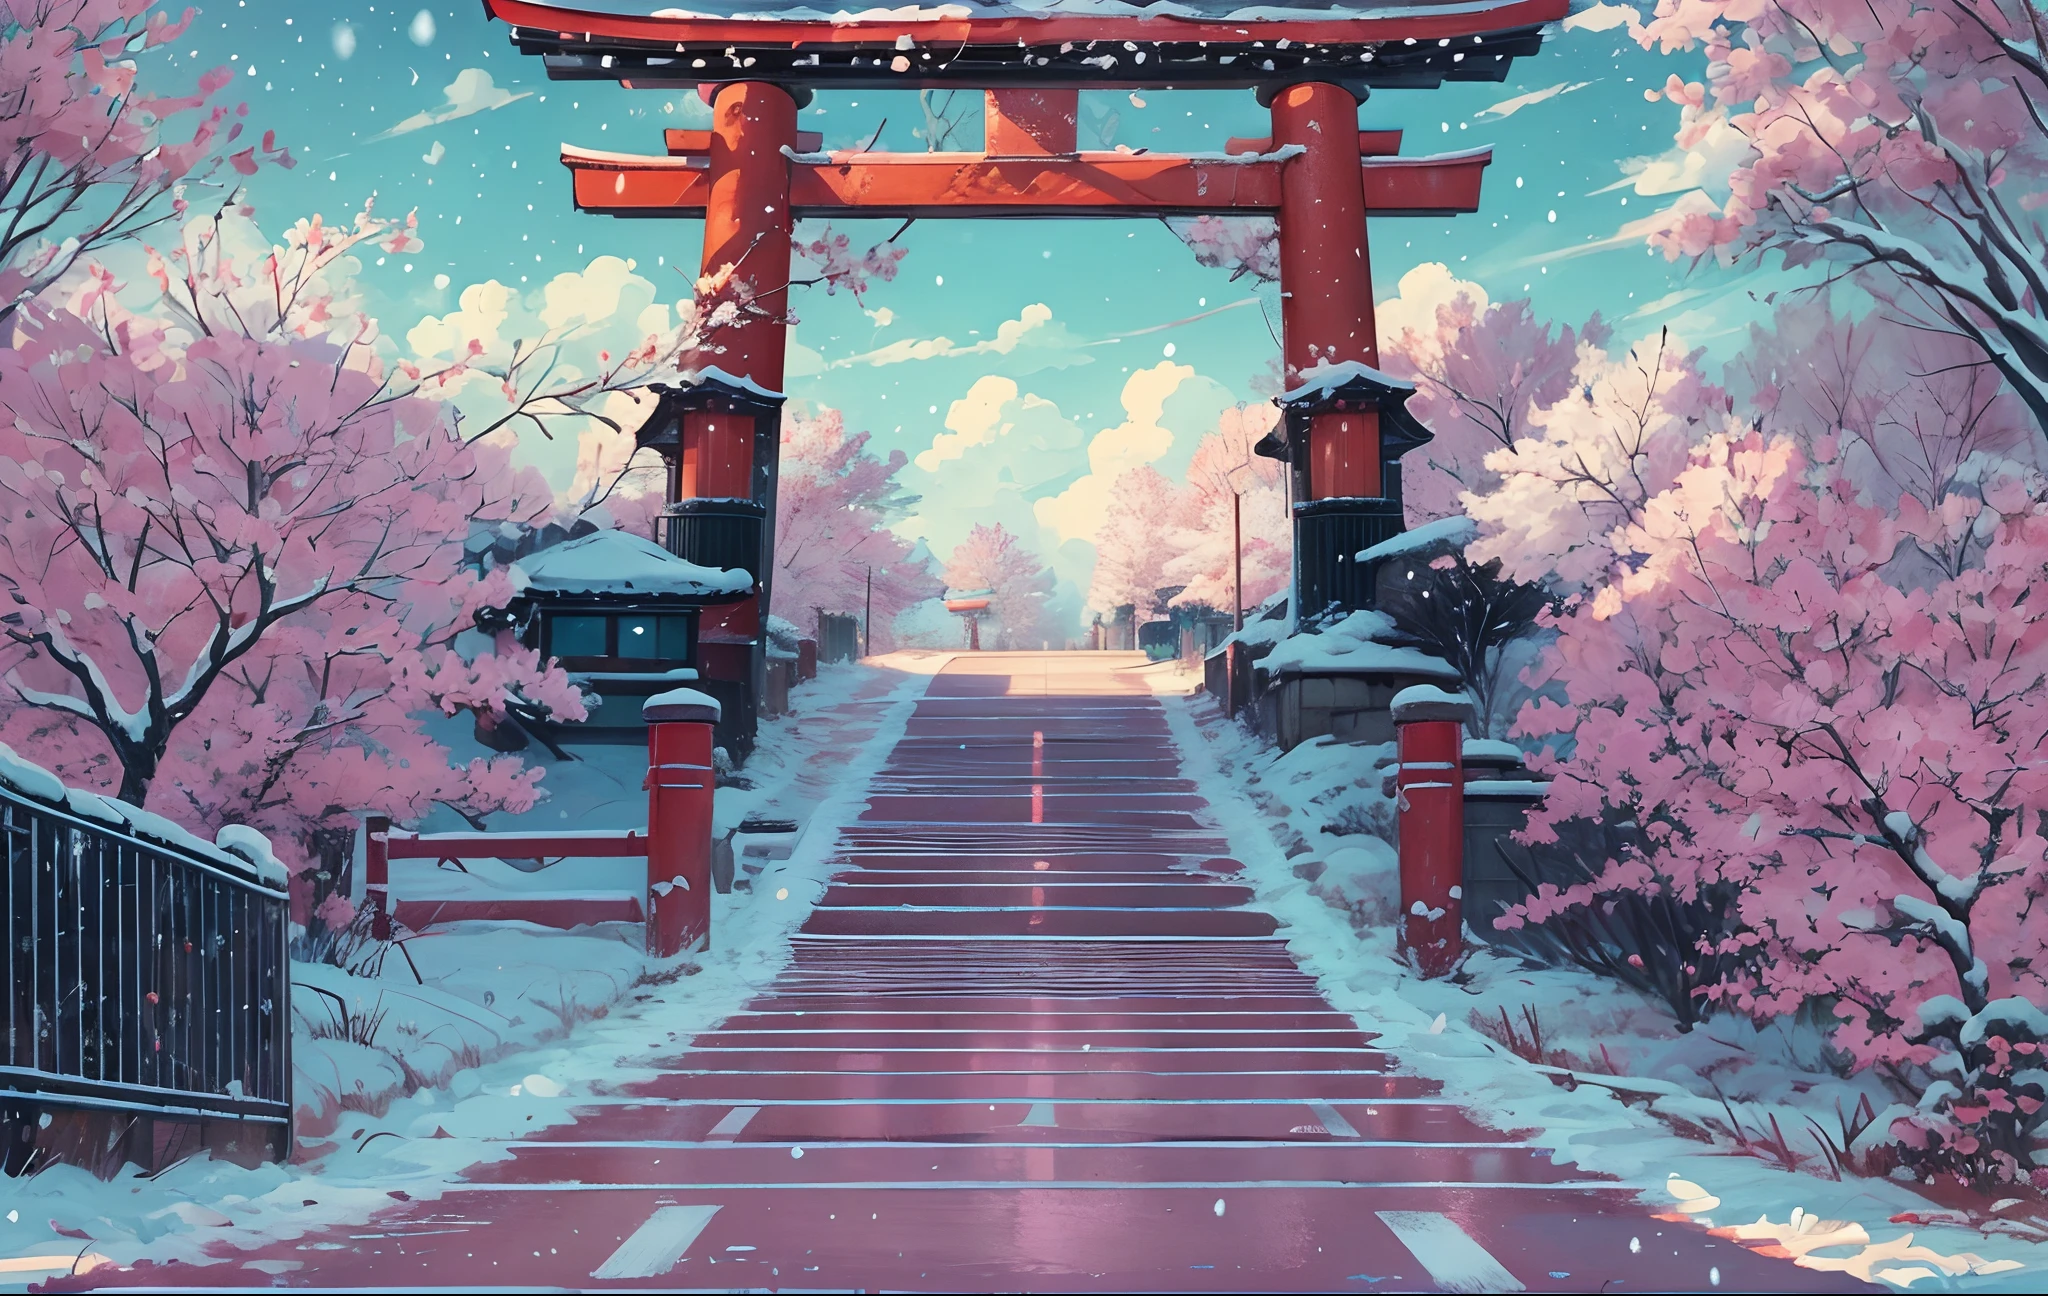 masterpiece, concept art, wide shot, panoramic, (a street full of graffiti at night with a torii gate in the distance), (winter), snowy, a detailed matte painting, by Makoto Shinkai, widescreen shot, driveway, sakura trees-lined path, miyazaki's animated film, endless night, sakura trees along street, art for the film in color, detailed digital anime art, (epic composition, epic proportion), HD